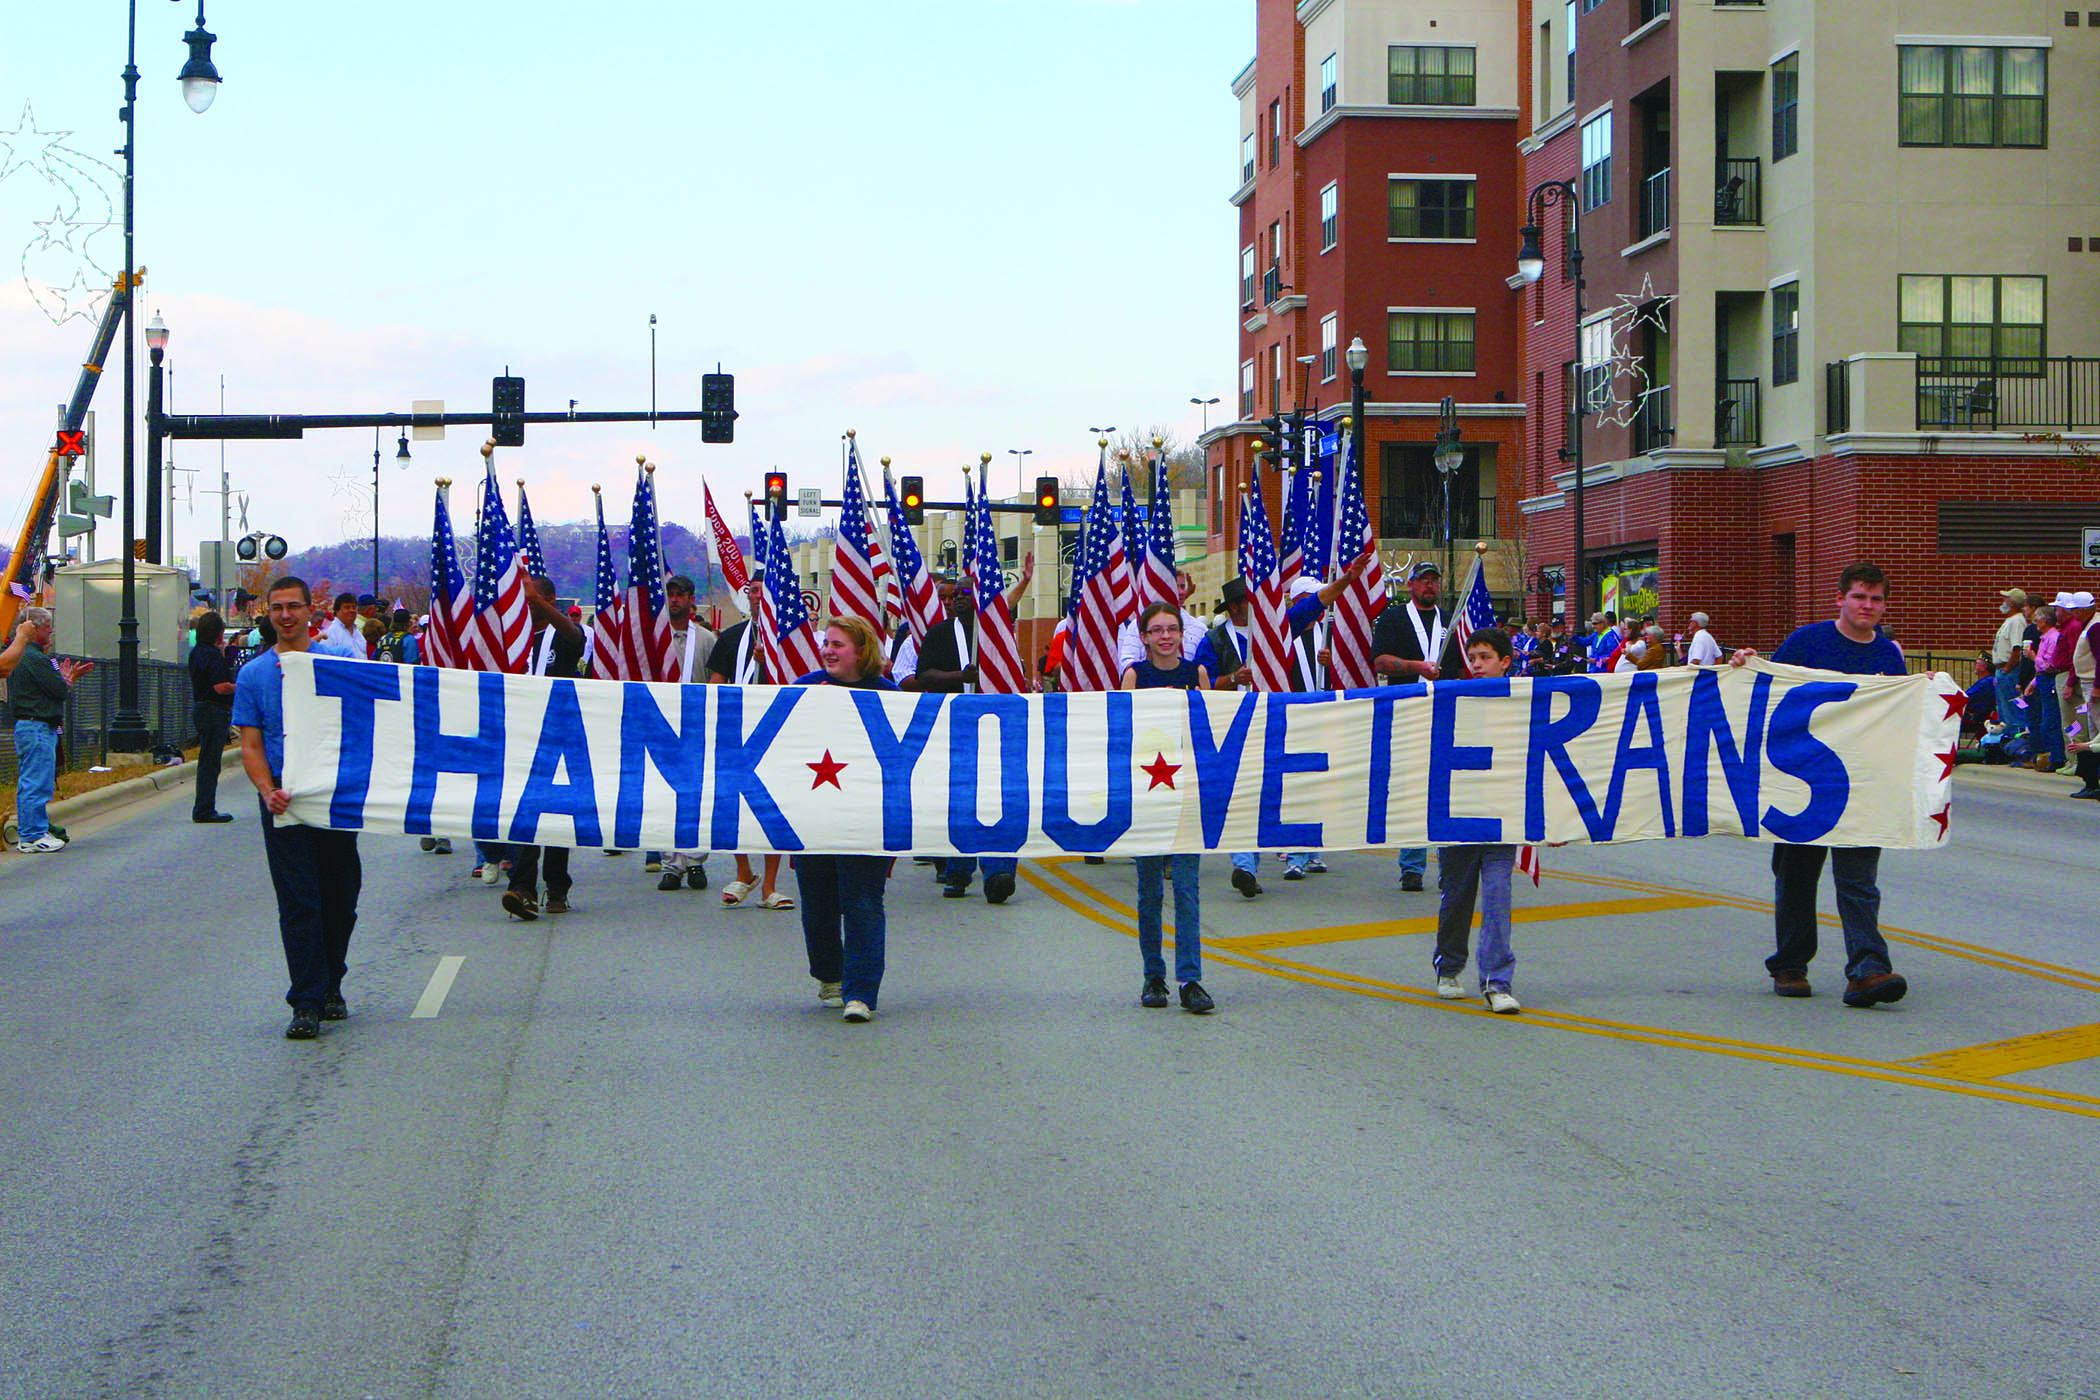 Veteran’s Week, Branson (Courtesy of the Branson/Lakes Area Convention and Visitors Bureau)